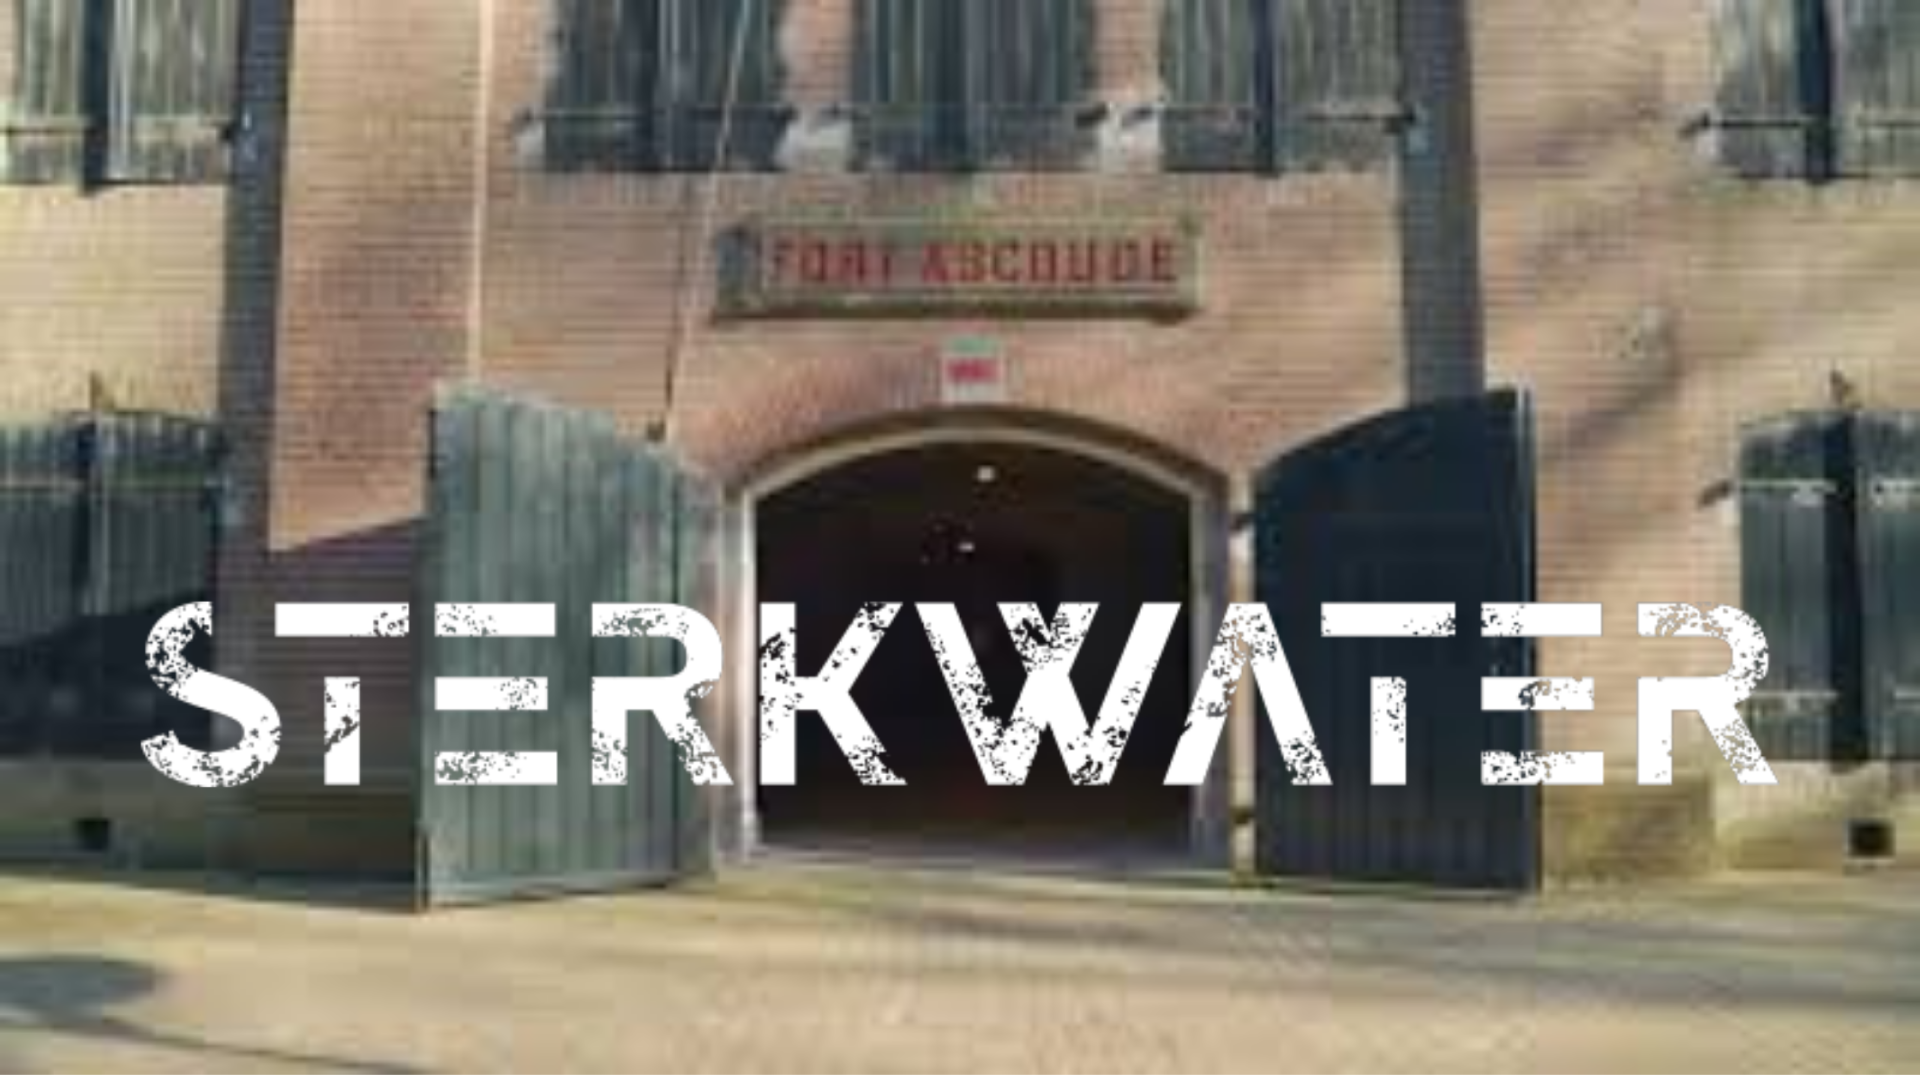 SterkWater Fort Abcoude